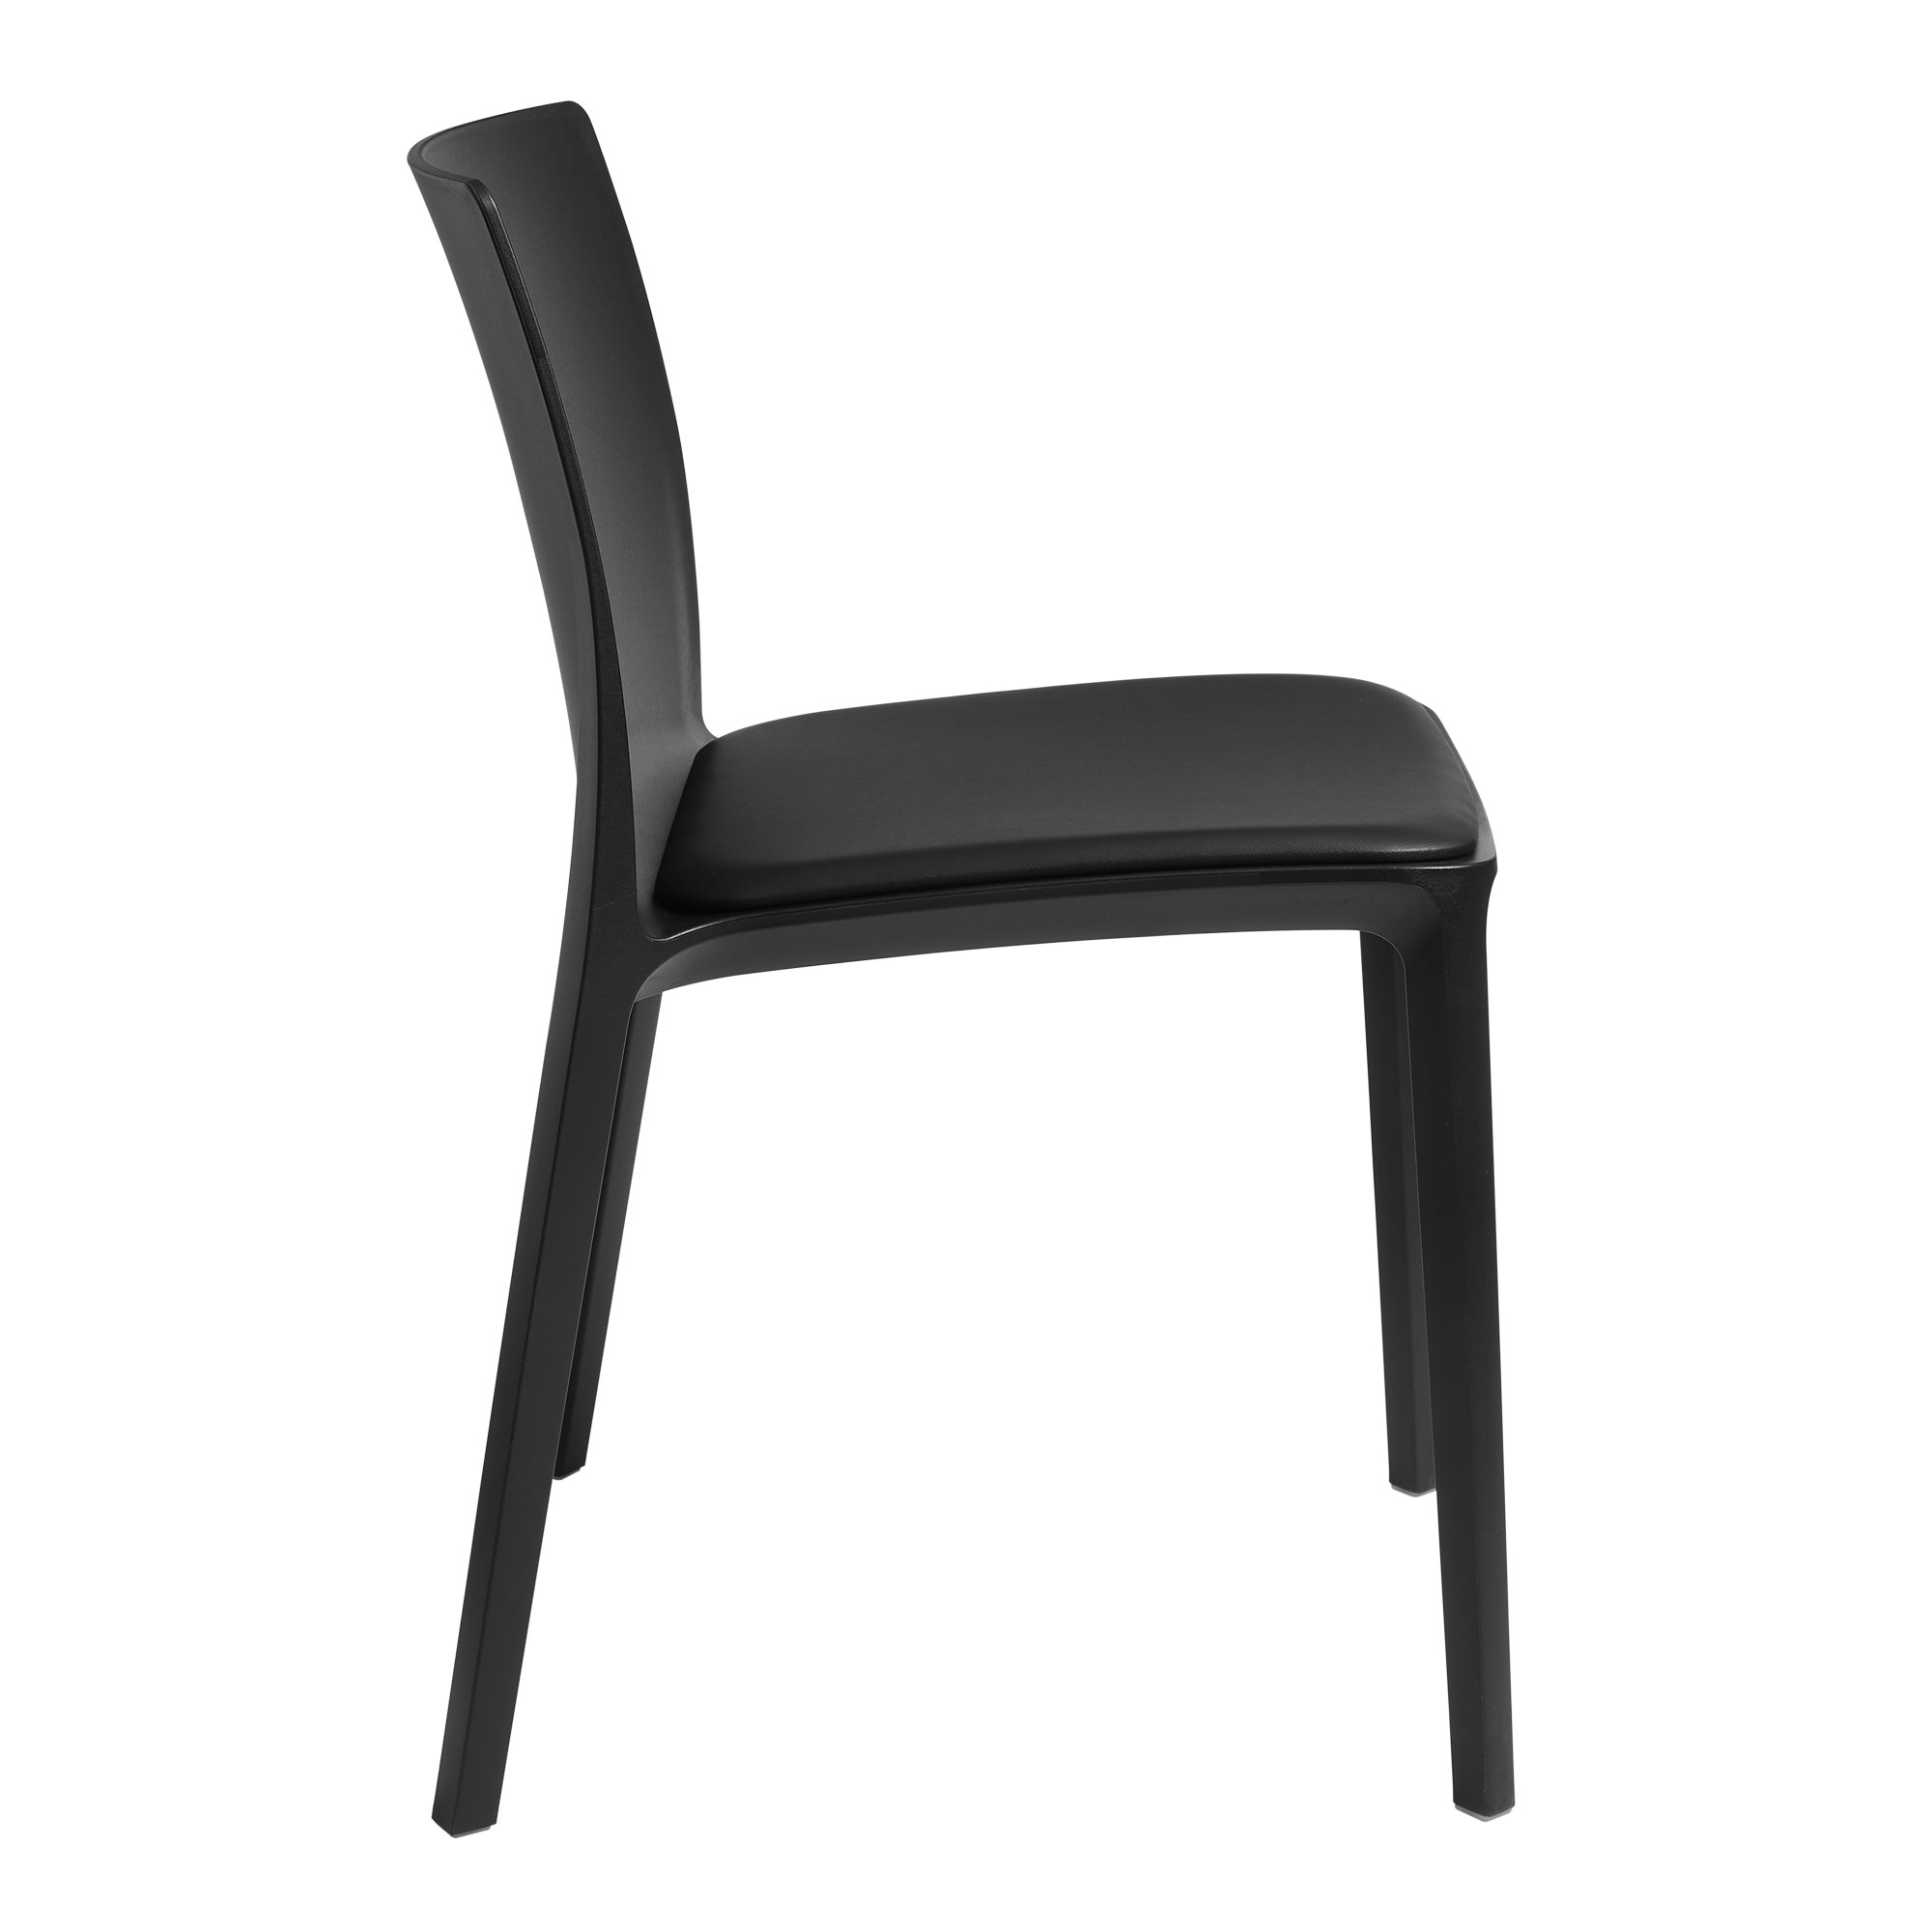 Black Ayrton Stackable Chair for Indoor and Outdoor Use - Side View